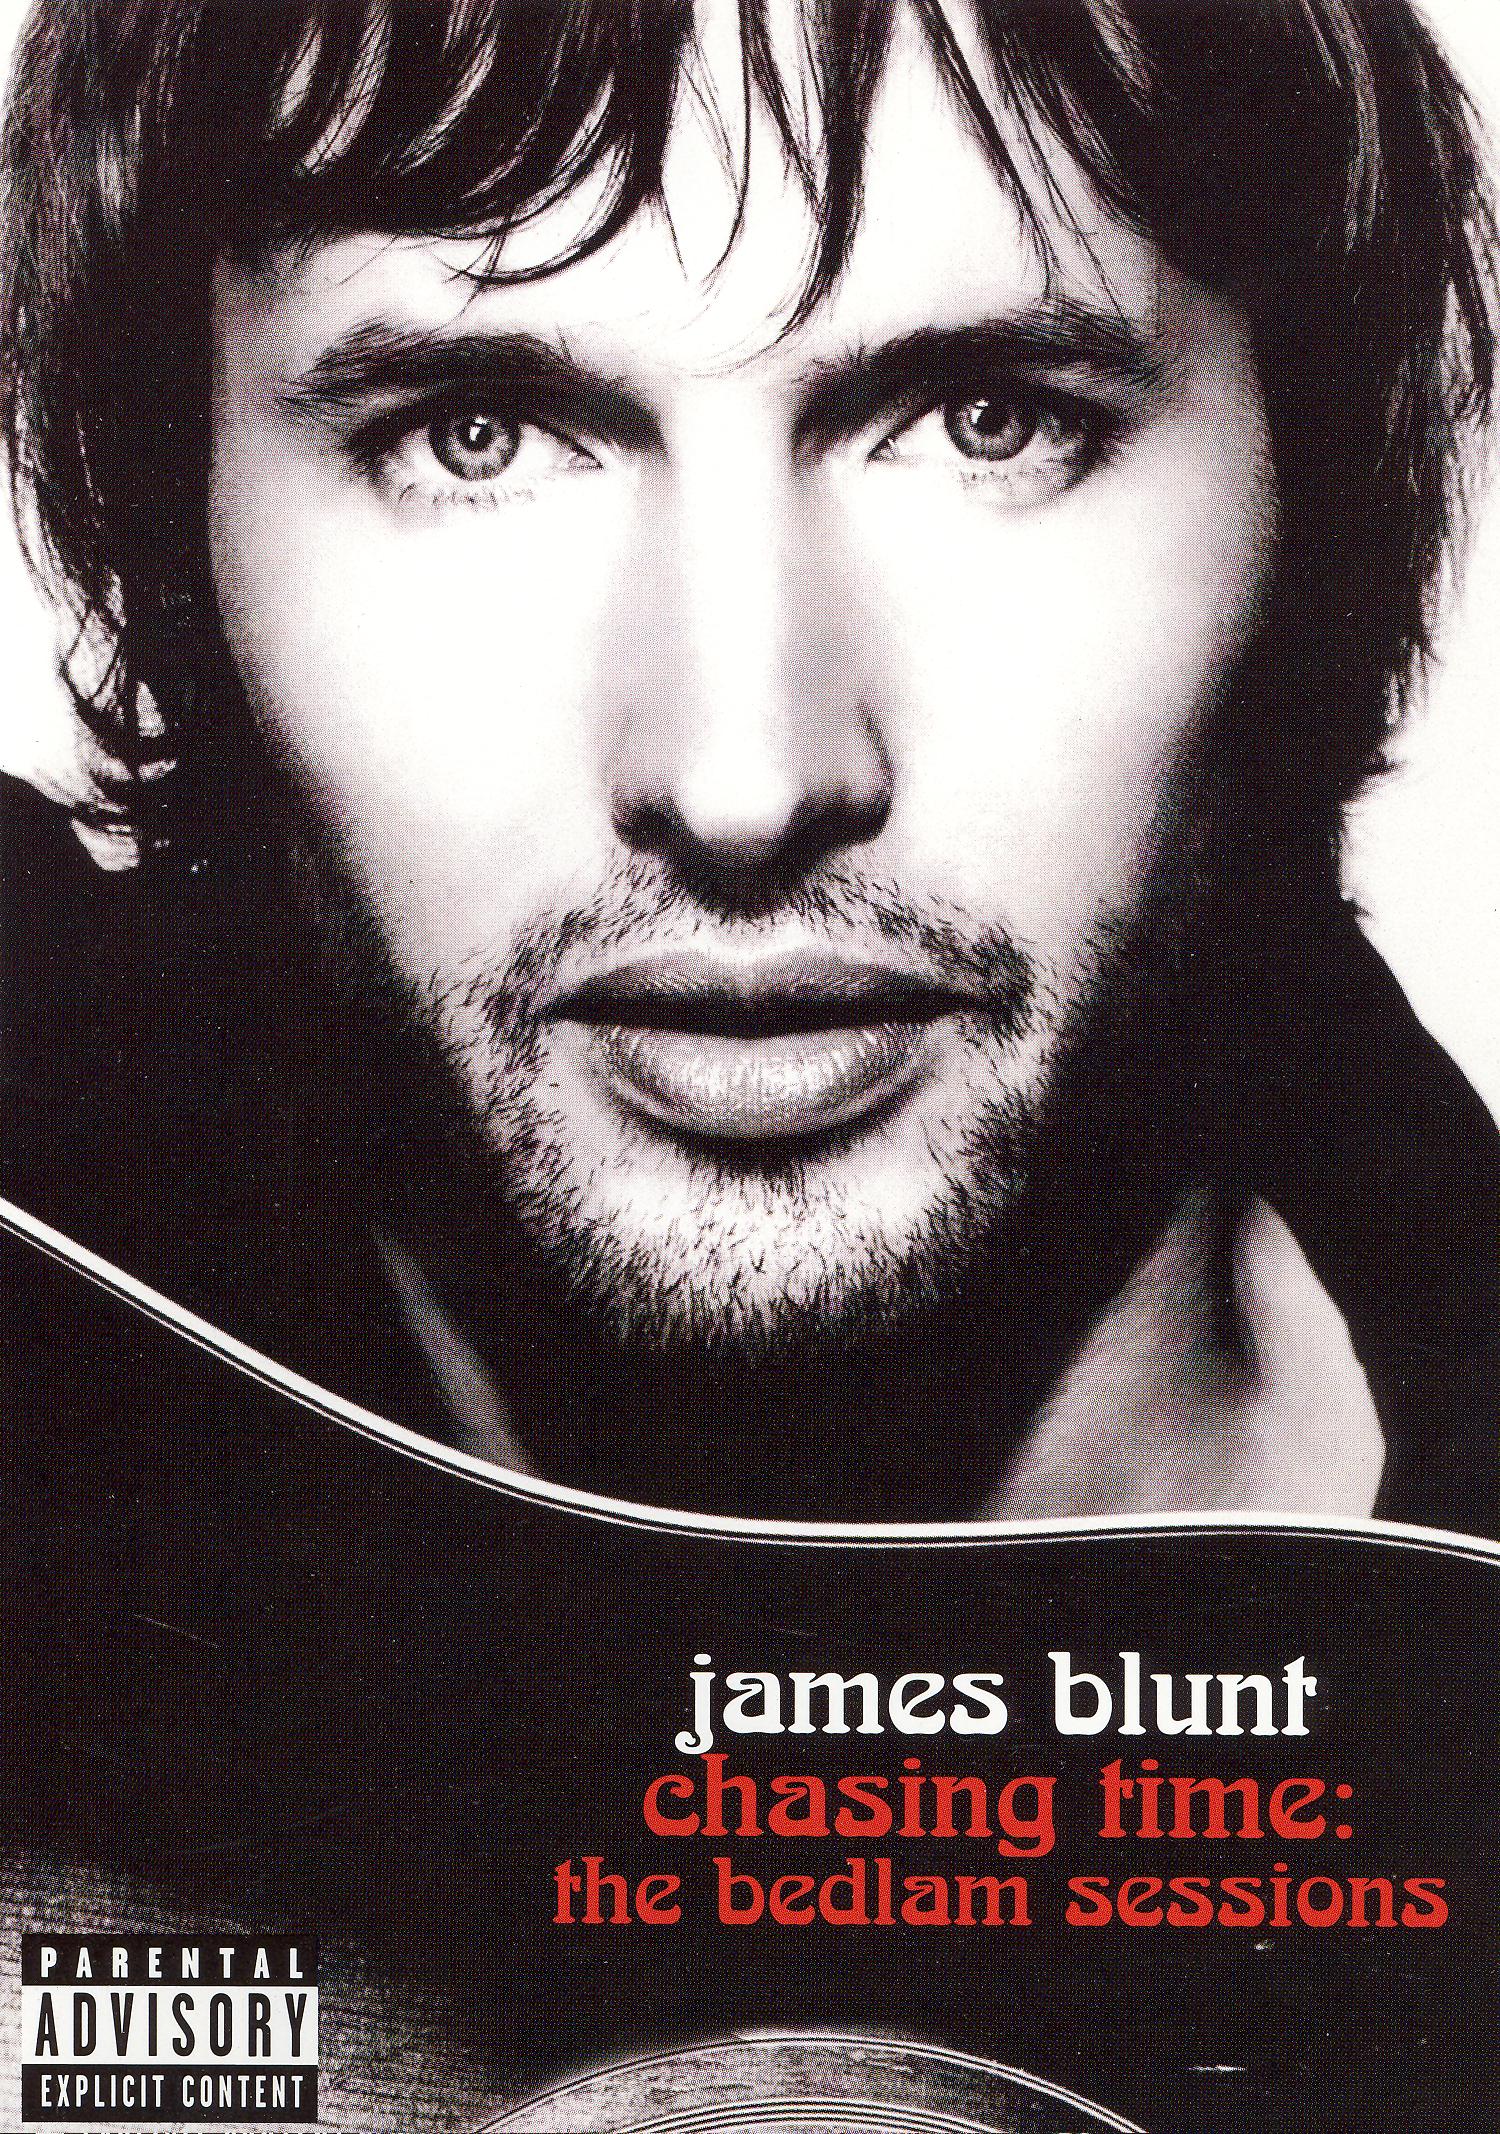 James blunt chasing time the bedlam sessions rar extractor